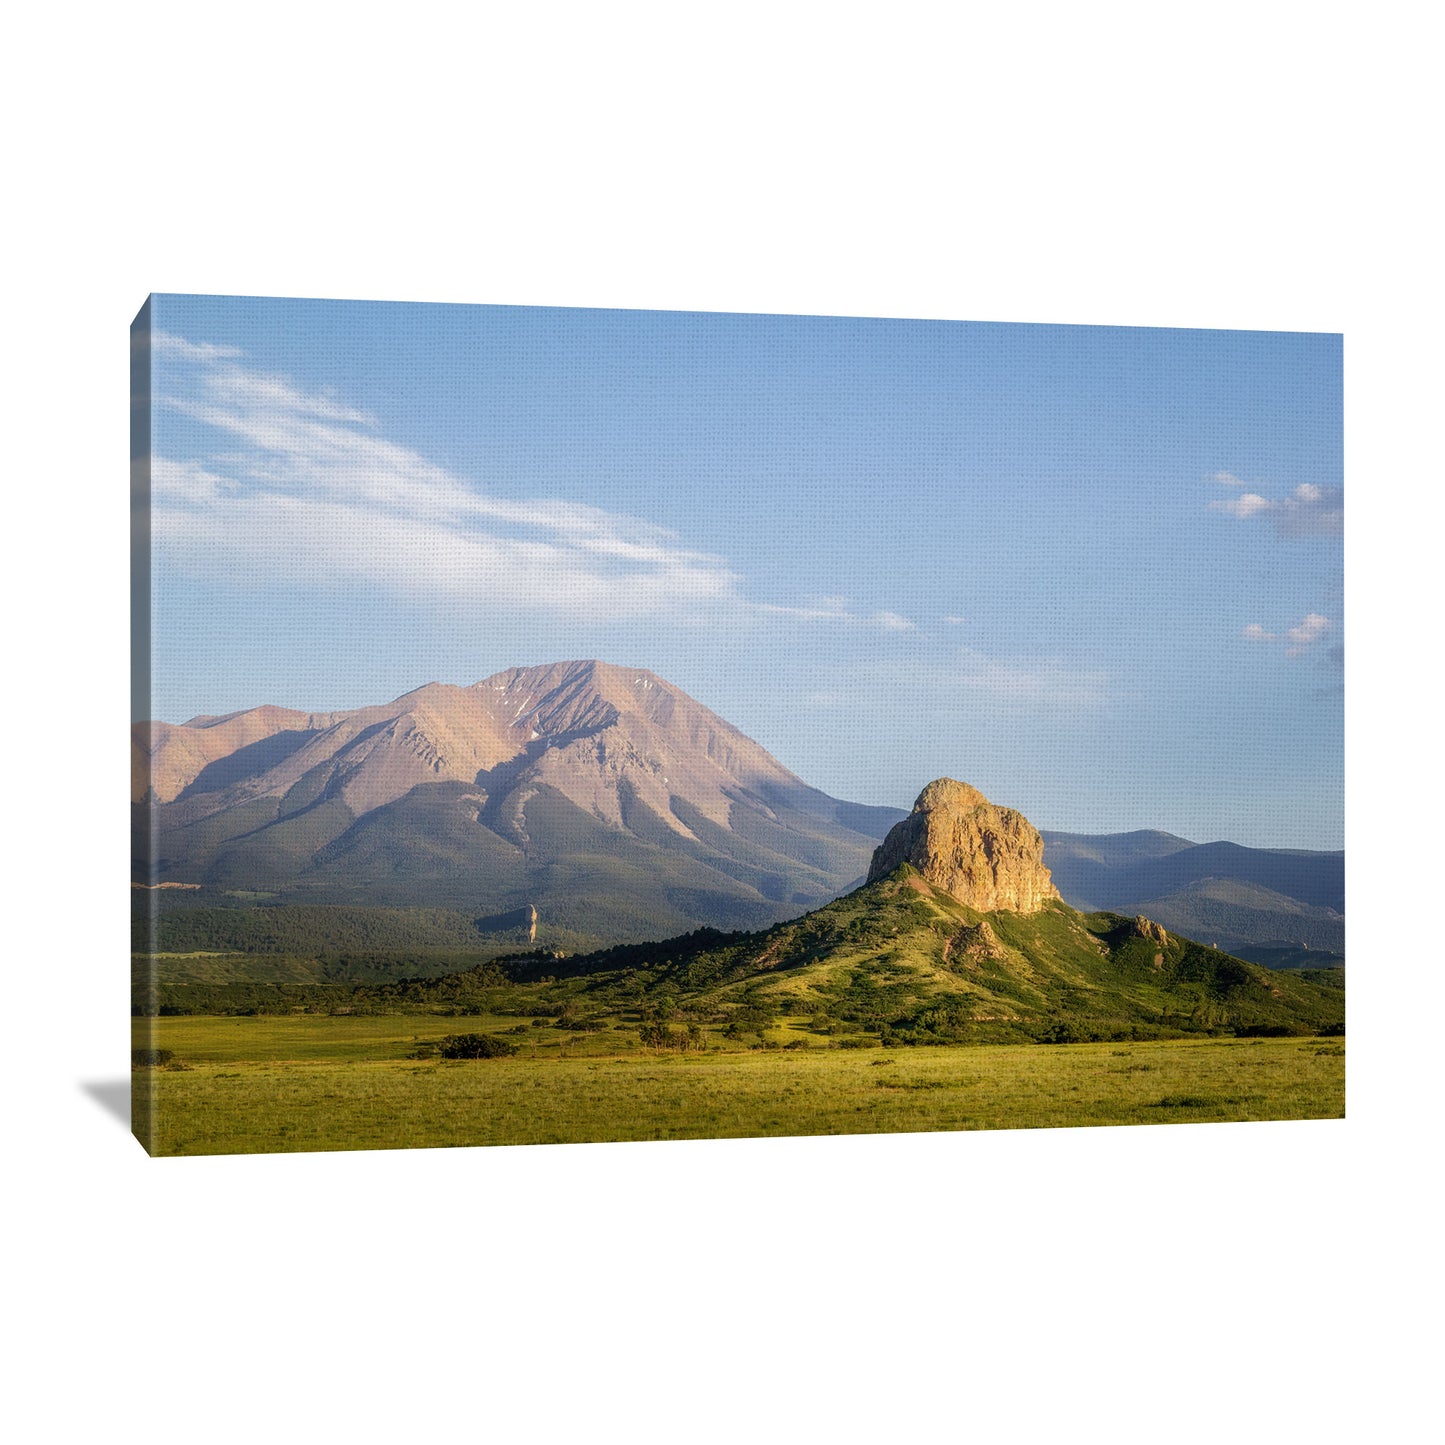 Nature photography canvas featuring the serene landscape of Goemmer Butte in Colorado, capturing the beauty of the region's natural scenery as wall art.